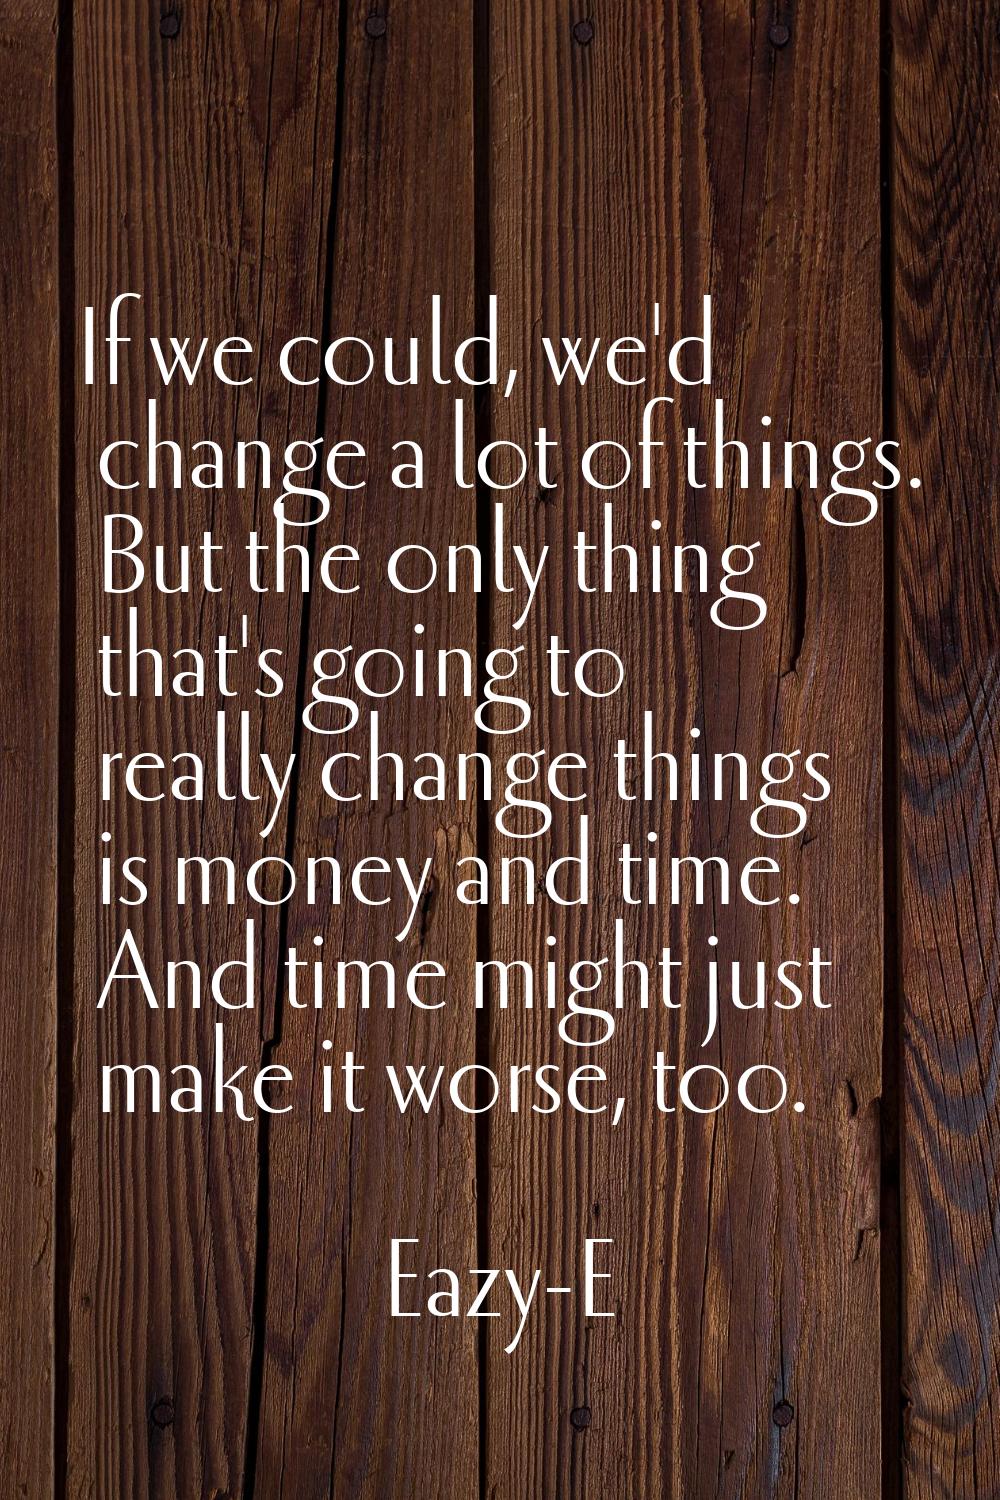 If we could, we'd change a lot of things. But the only thing that's going to really change things i